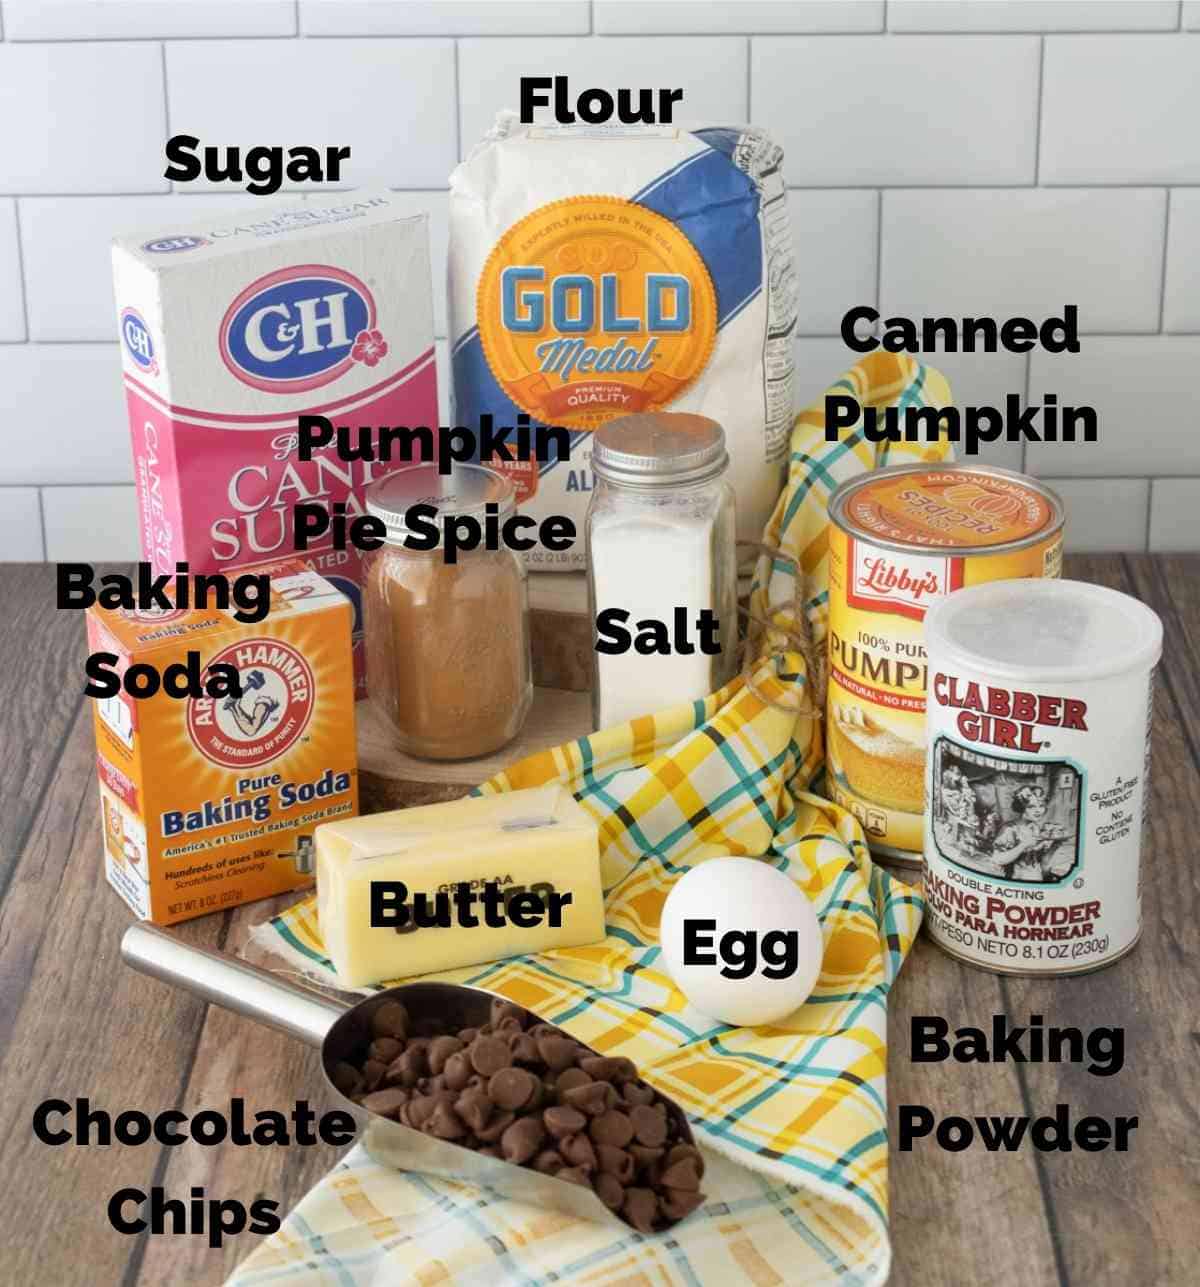 All the ingredients you'll need to make this homemade pumpkin bread.